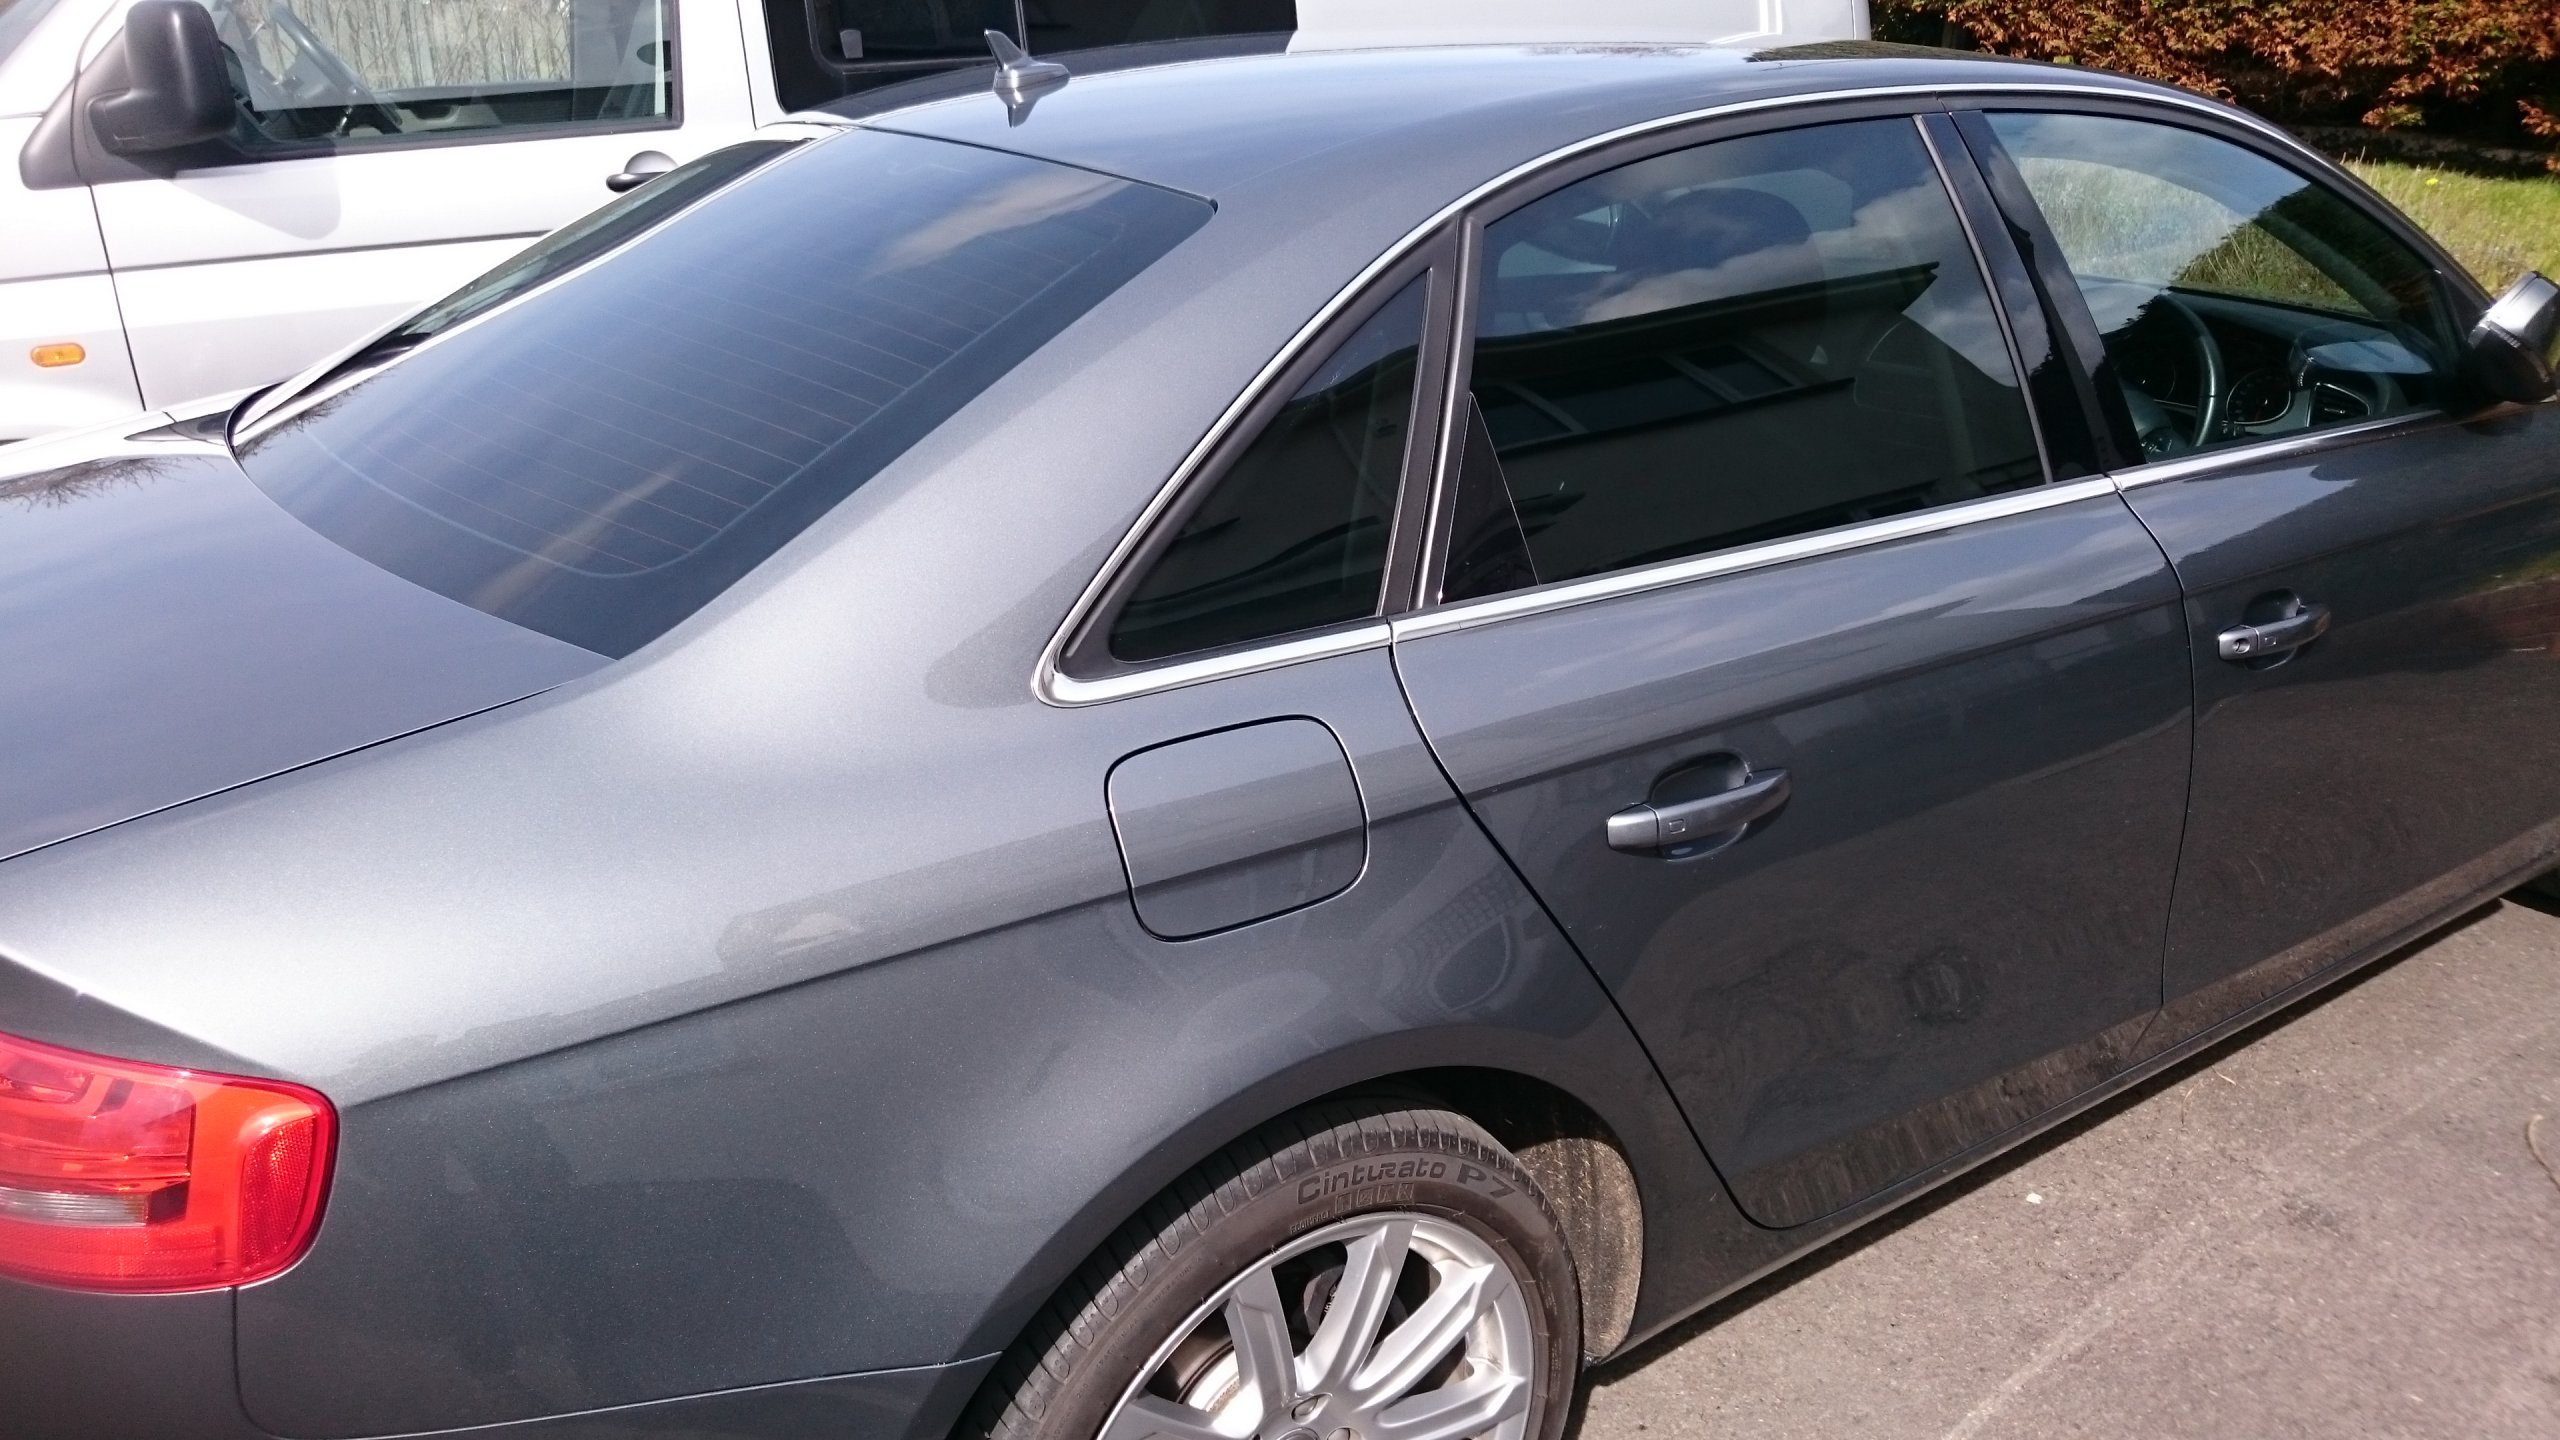 Audi A4 saloon auto window tinting completed job. 18% visible light transmission film. Blocking out 82% light. Tinting Express Ltd Barnstaple